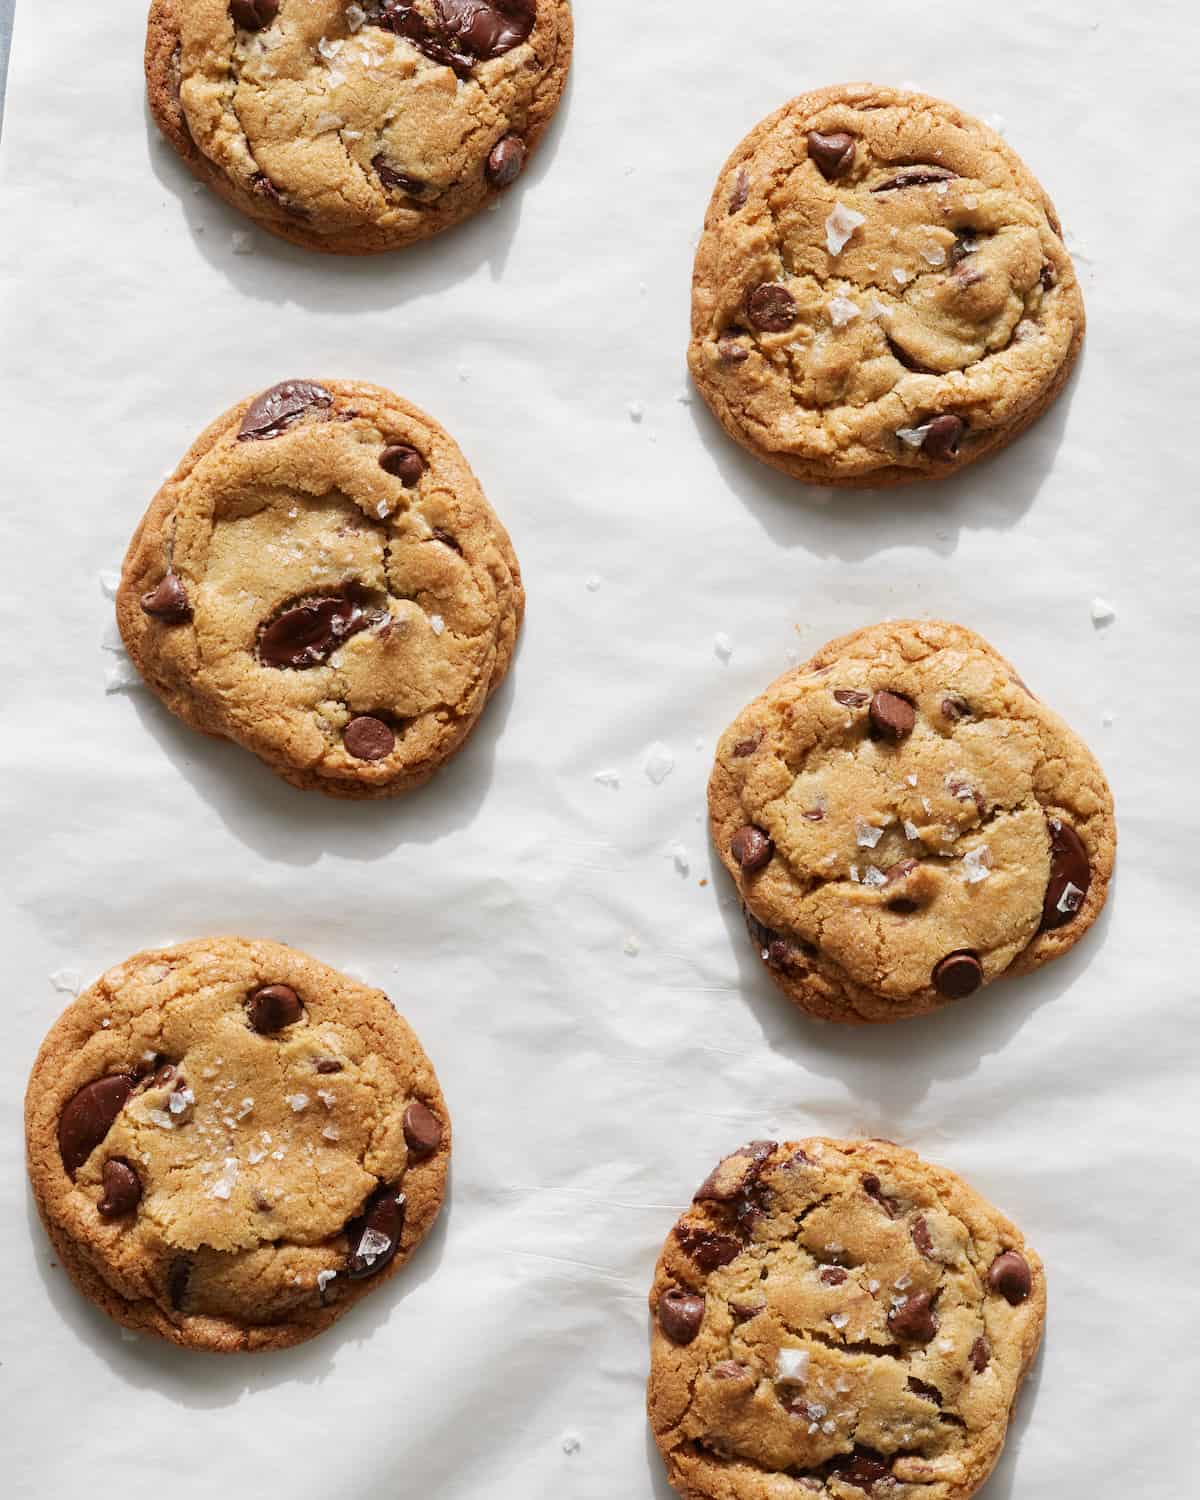 Freshly baked Chocolate Chip Cookies on a baking sheet lined with parchment.